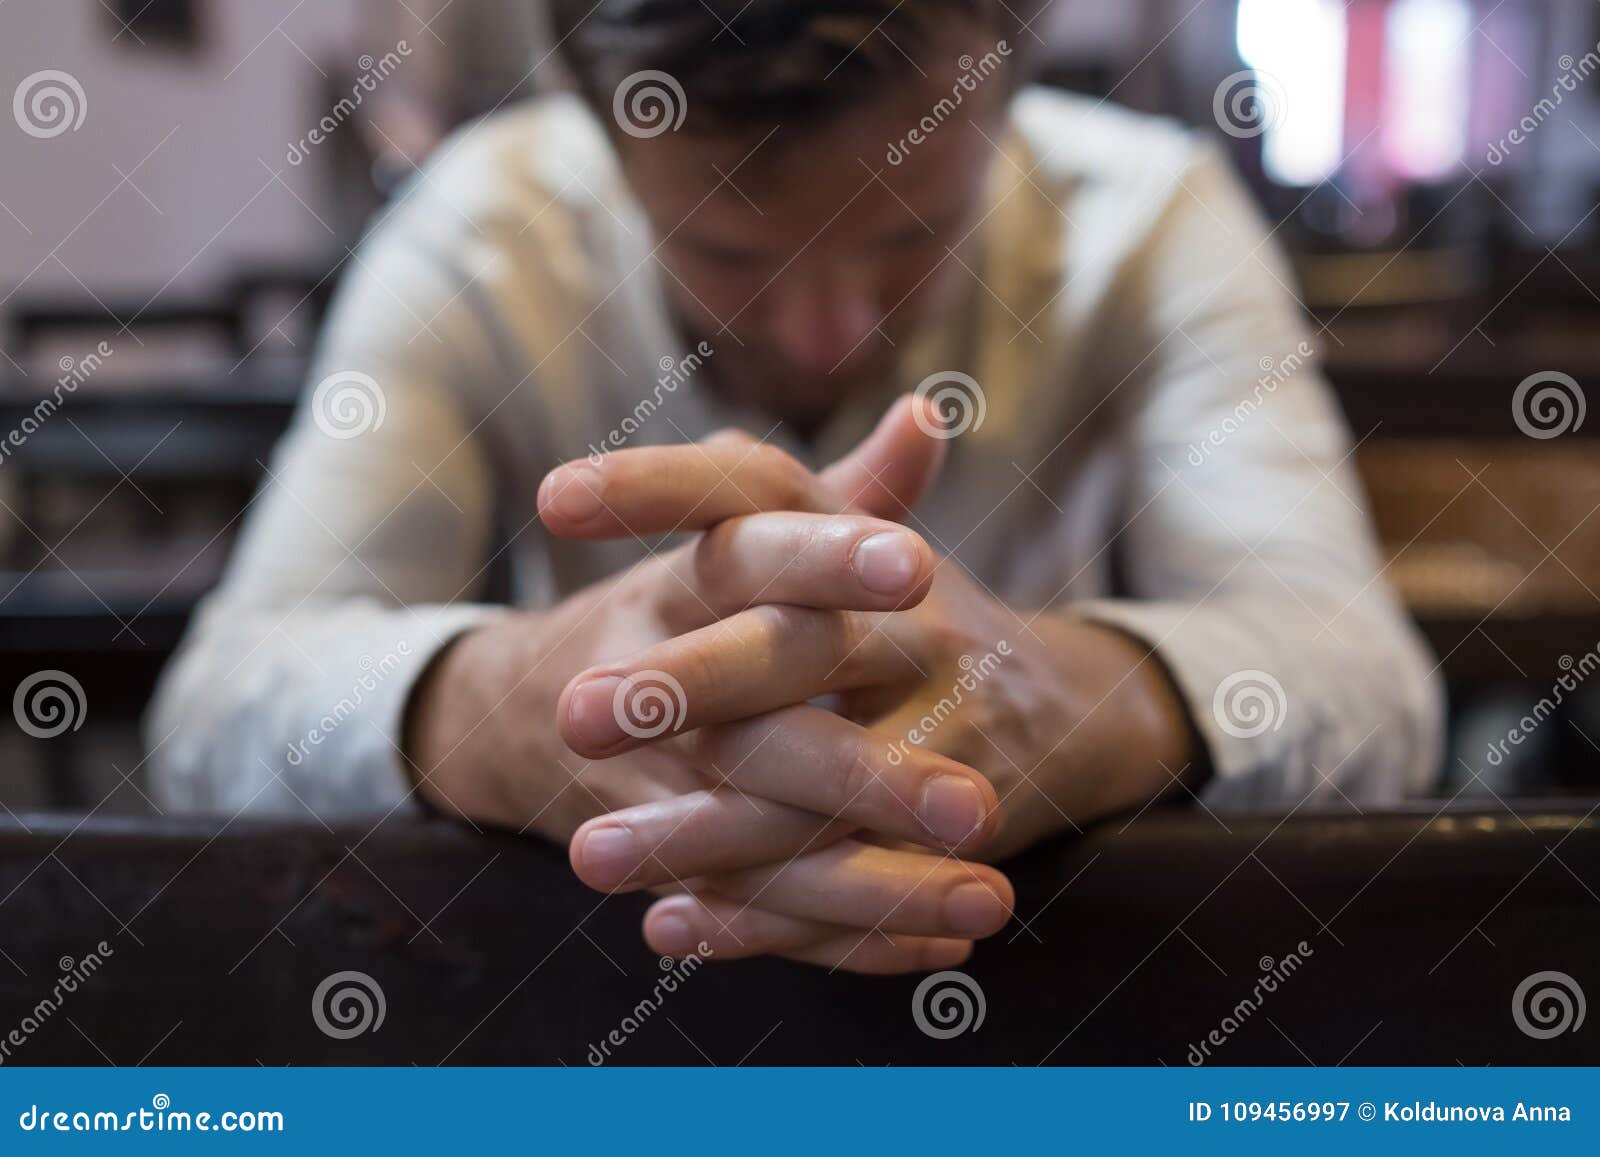 caucasian man praying in church. he has problems and ask god for help